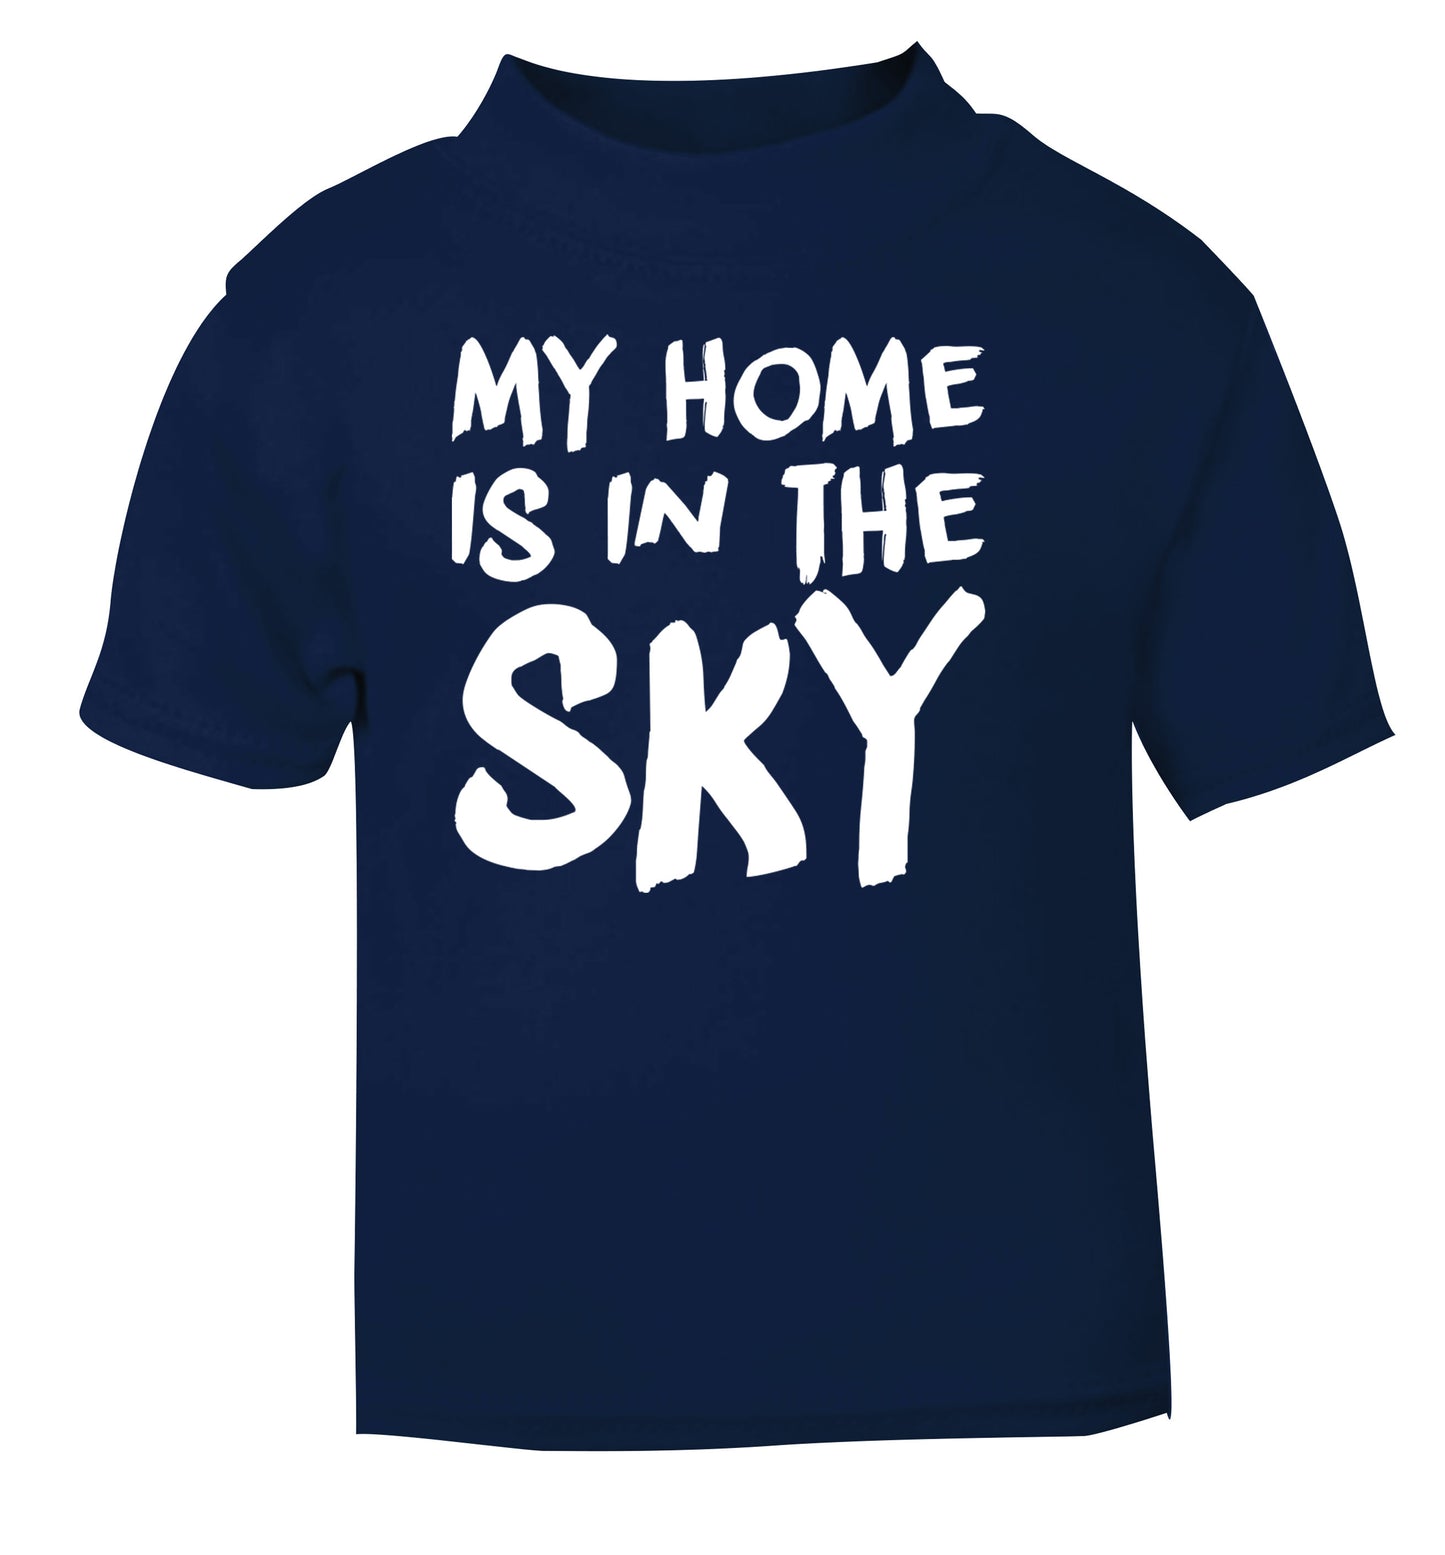 My home is in the sky navy Baby Toddler Tshirt 2 Years